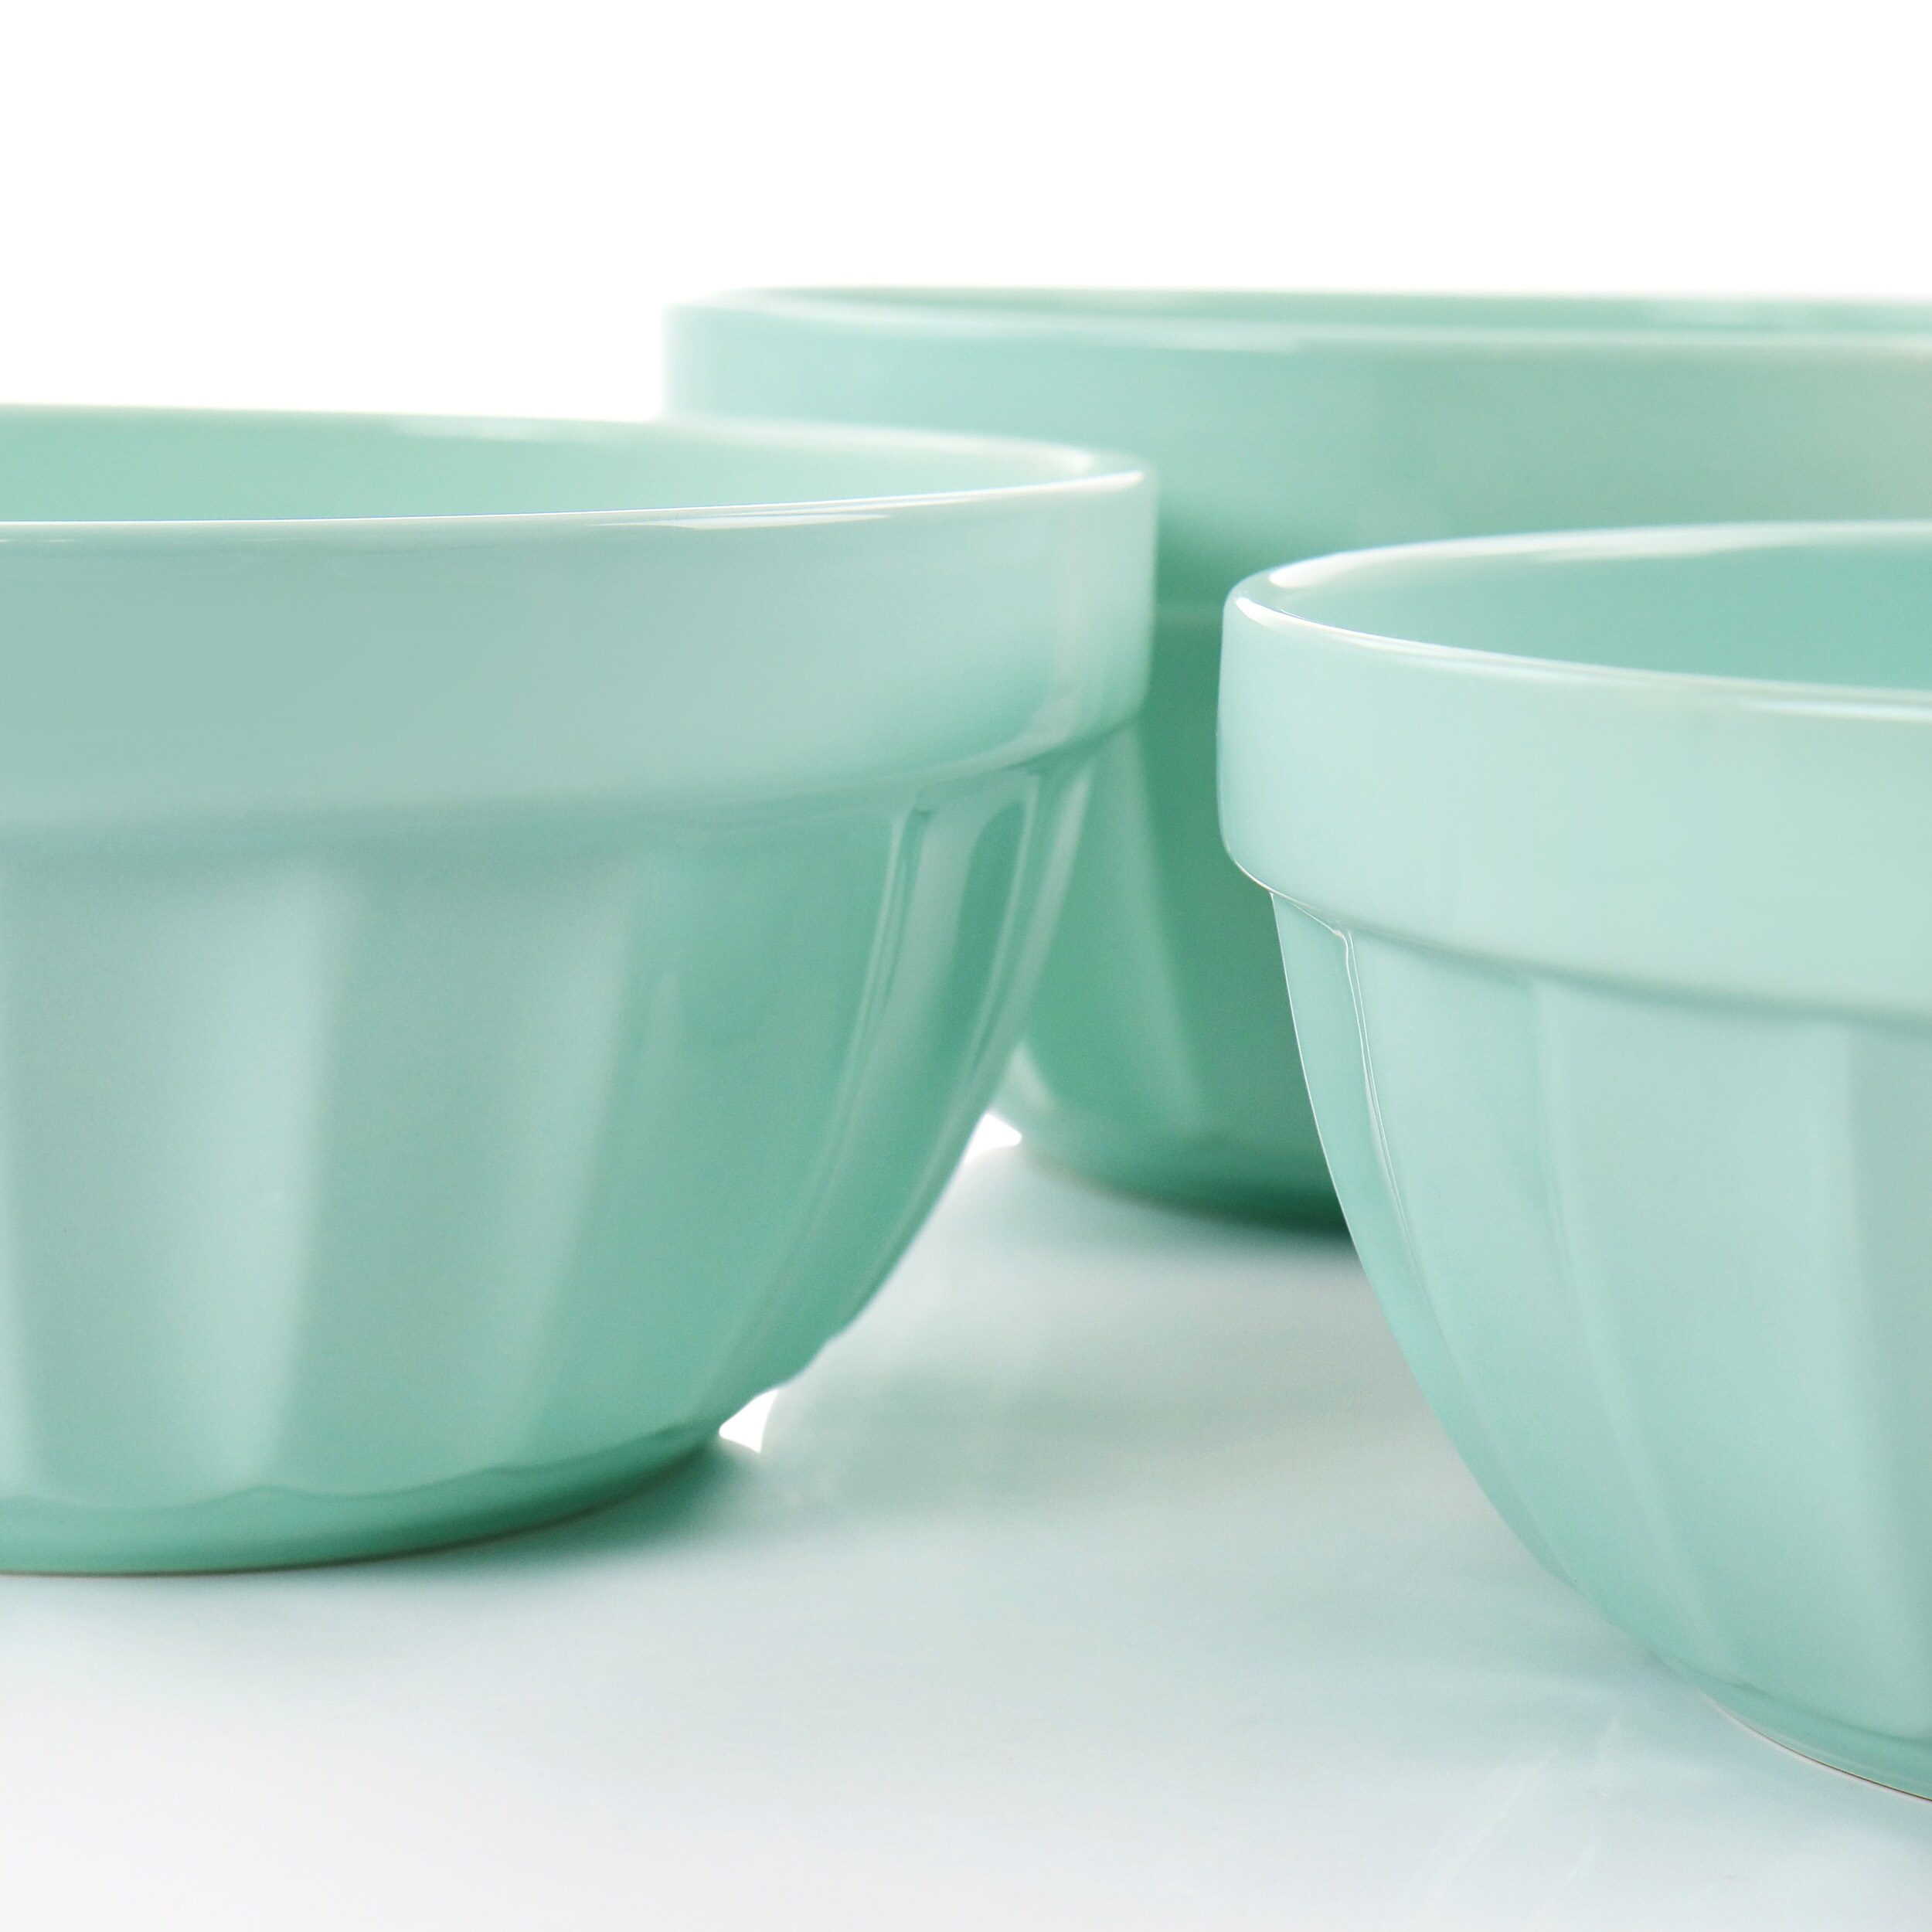 https://ak1.ostkcdn.com/images/products/is/images/direct/177770e1c00399454199dc96ab9e86e9f58bc027/Martha-Stewart-3-Piece-Stoneware-Bowl-Set-in-Mint.jpg